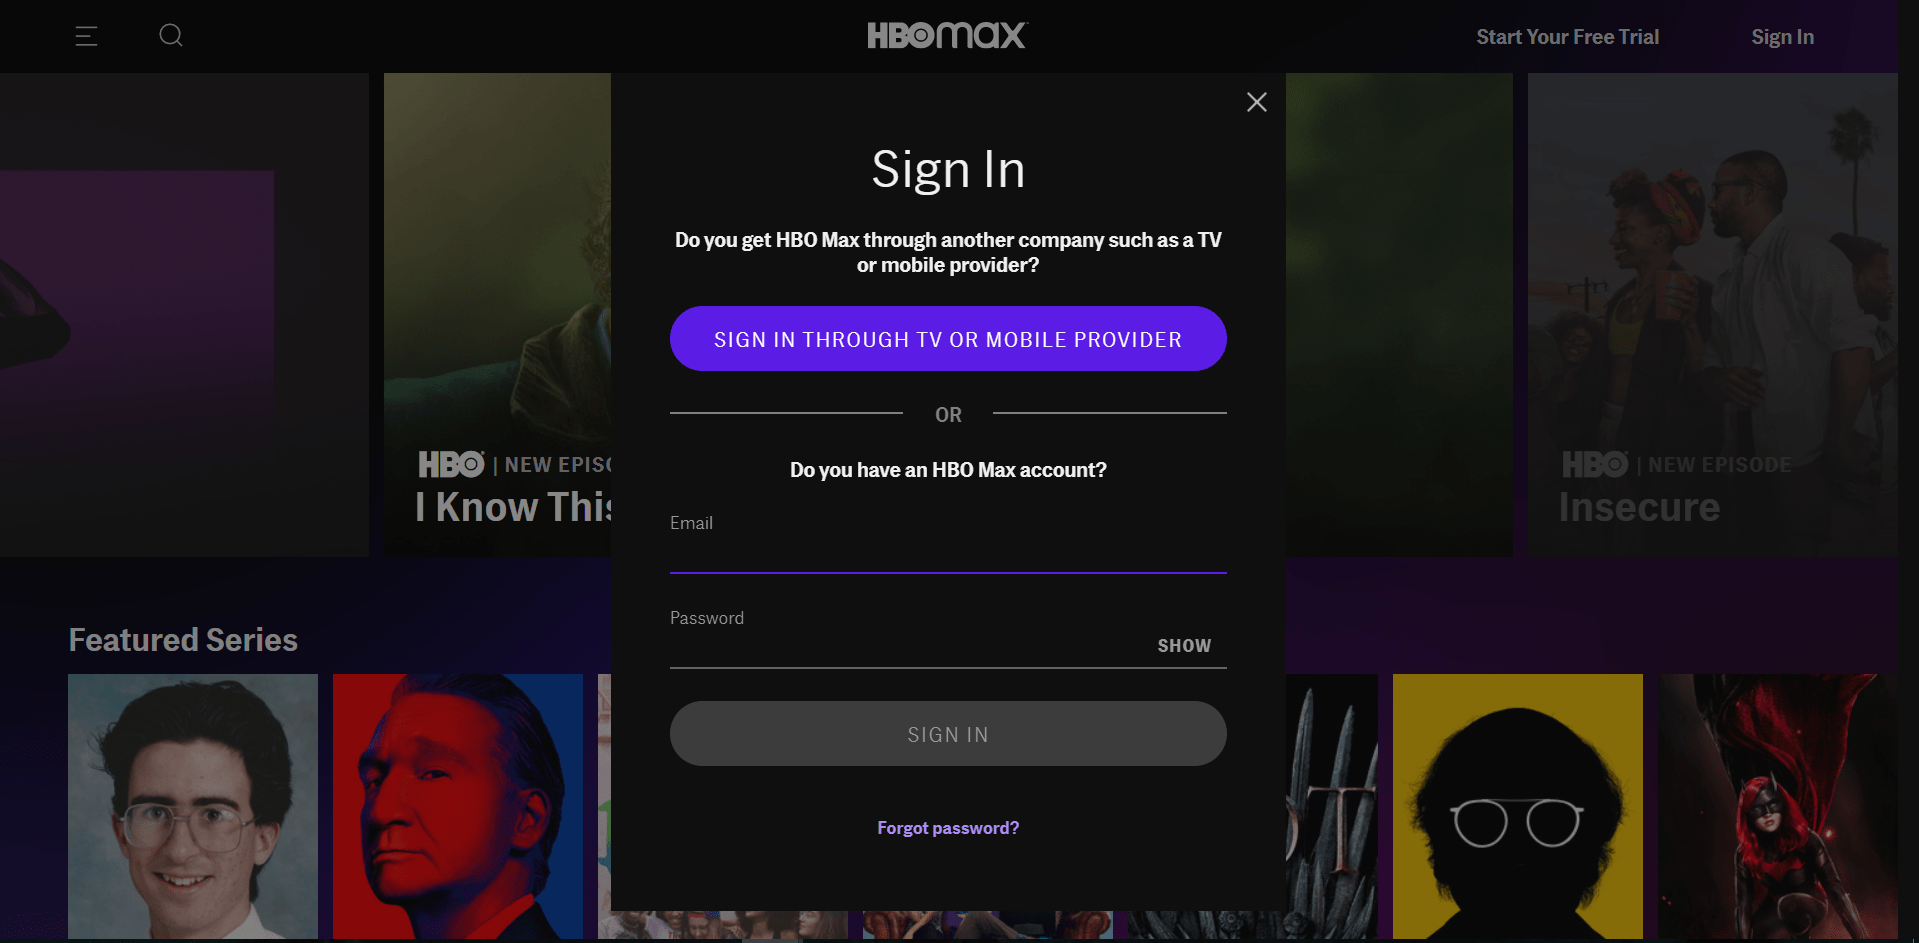 can't sign into HBO Max account